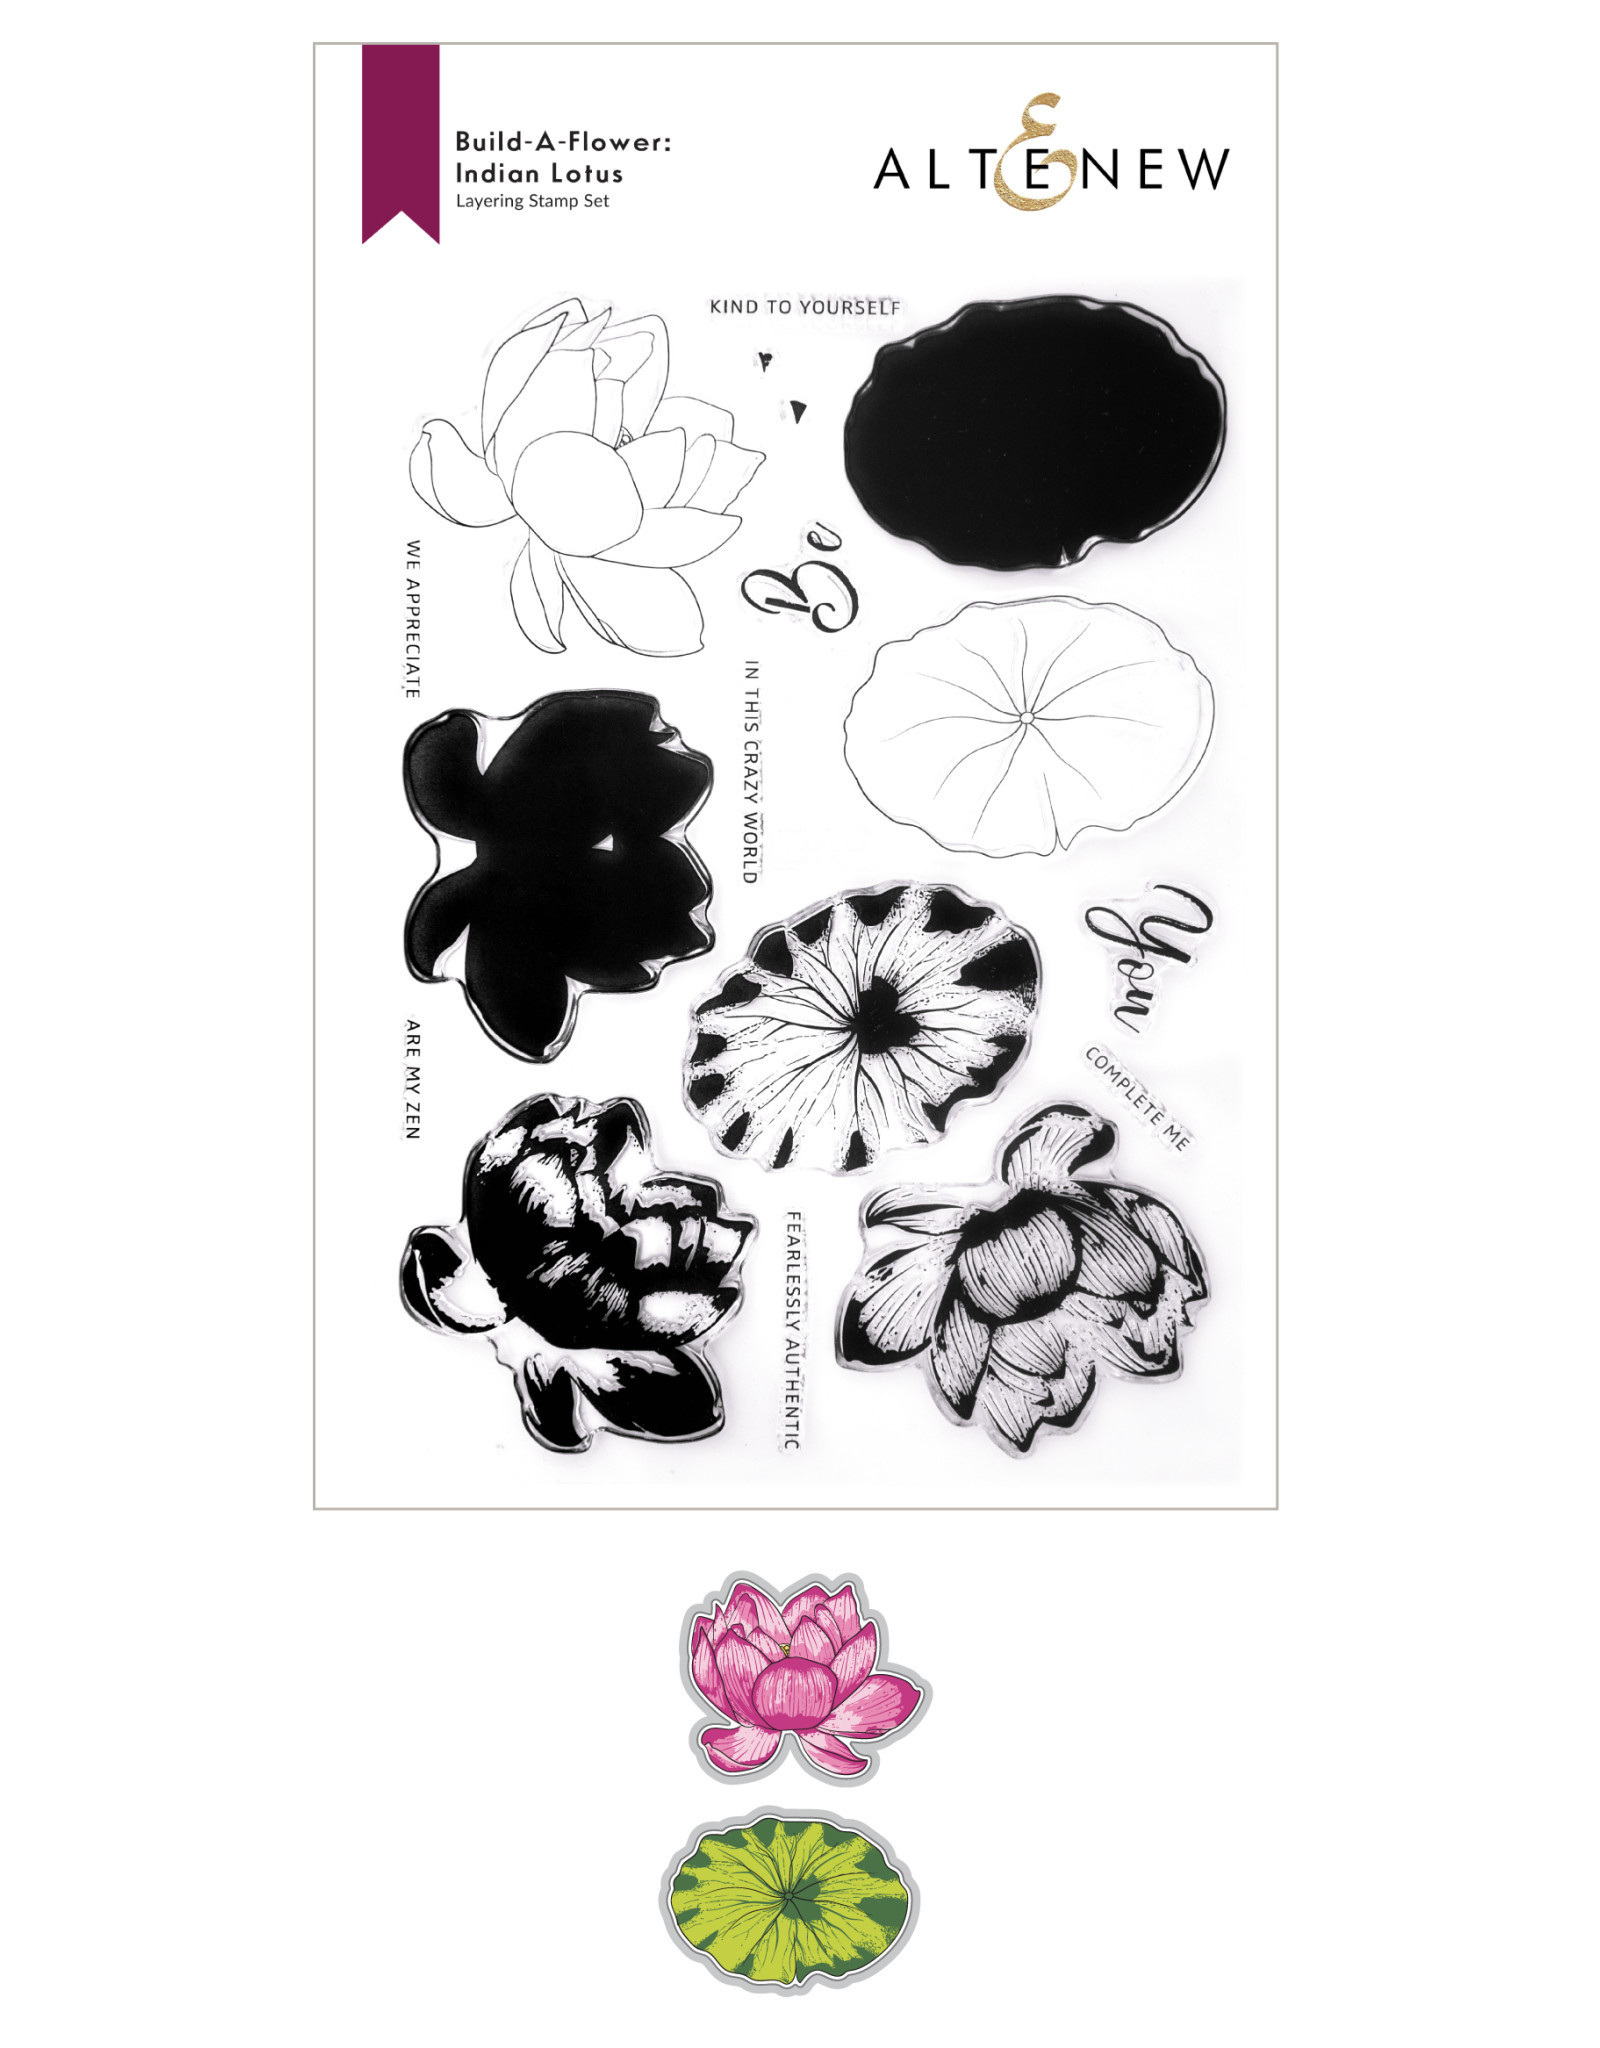 ALTENEW Build A Flower -Indian Lotus Layering Stamp and Die Set